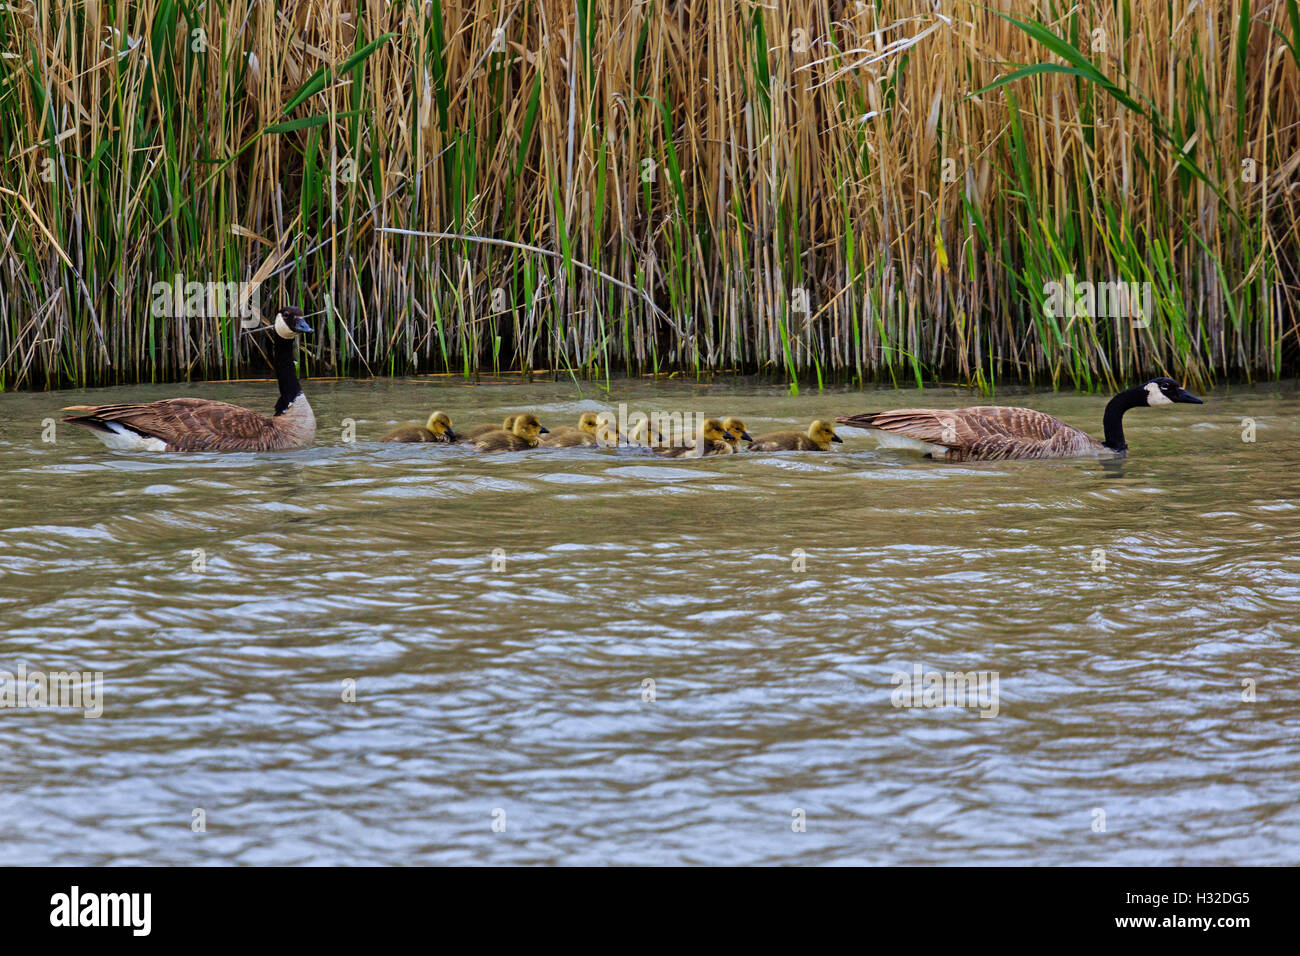 A family of Canada Geese (Branta canadensis) swims up the main channel of the Bear River Migratory Bird Refuge near Brigham City, Utah, USA. Stock Photo